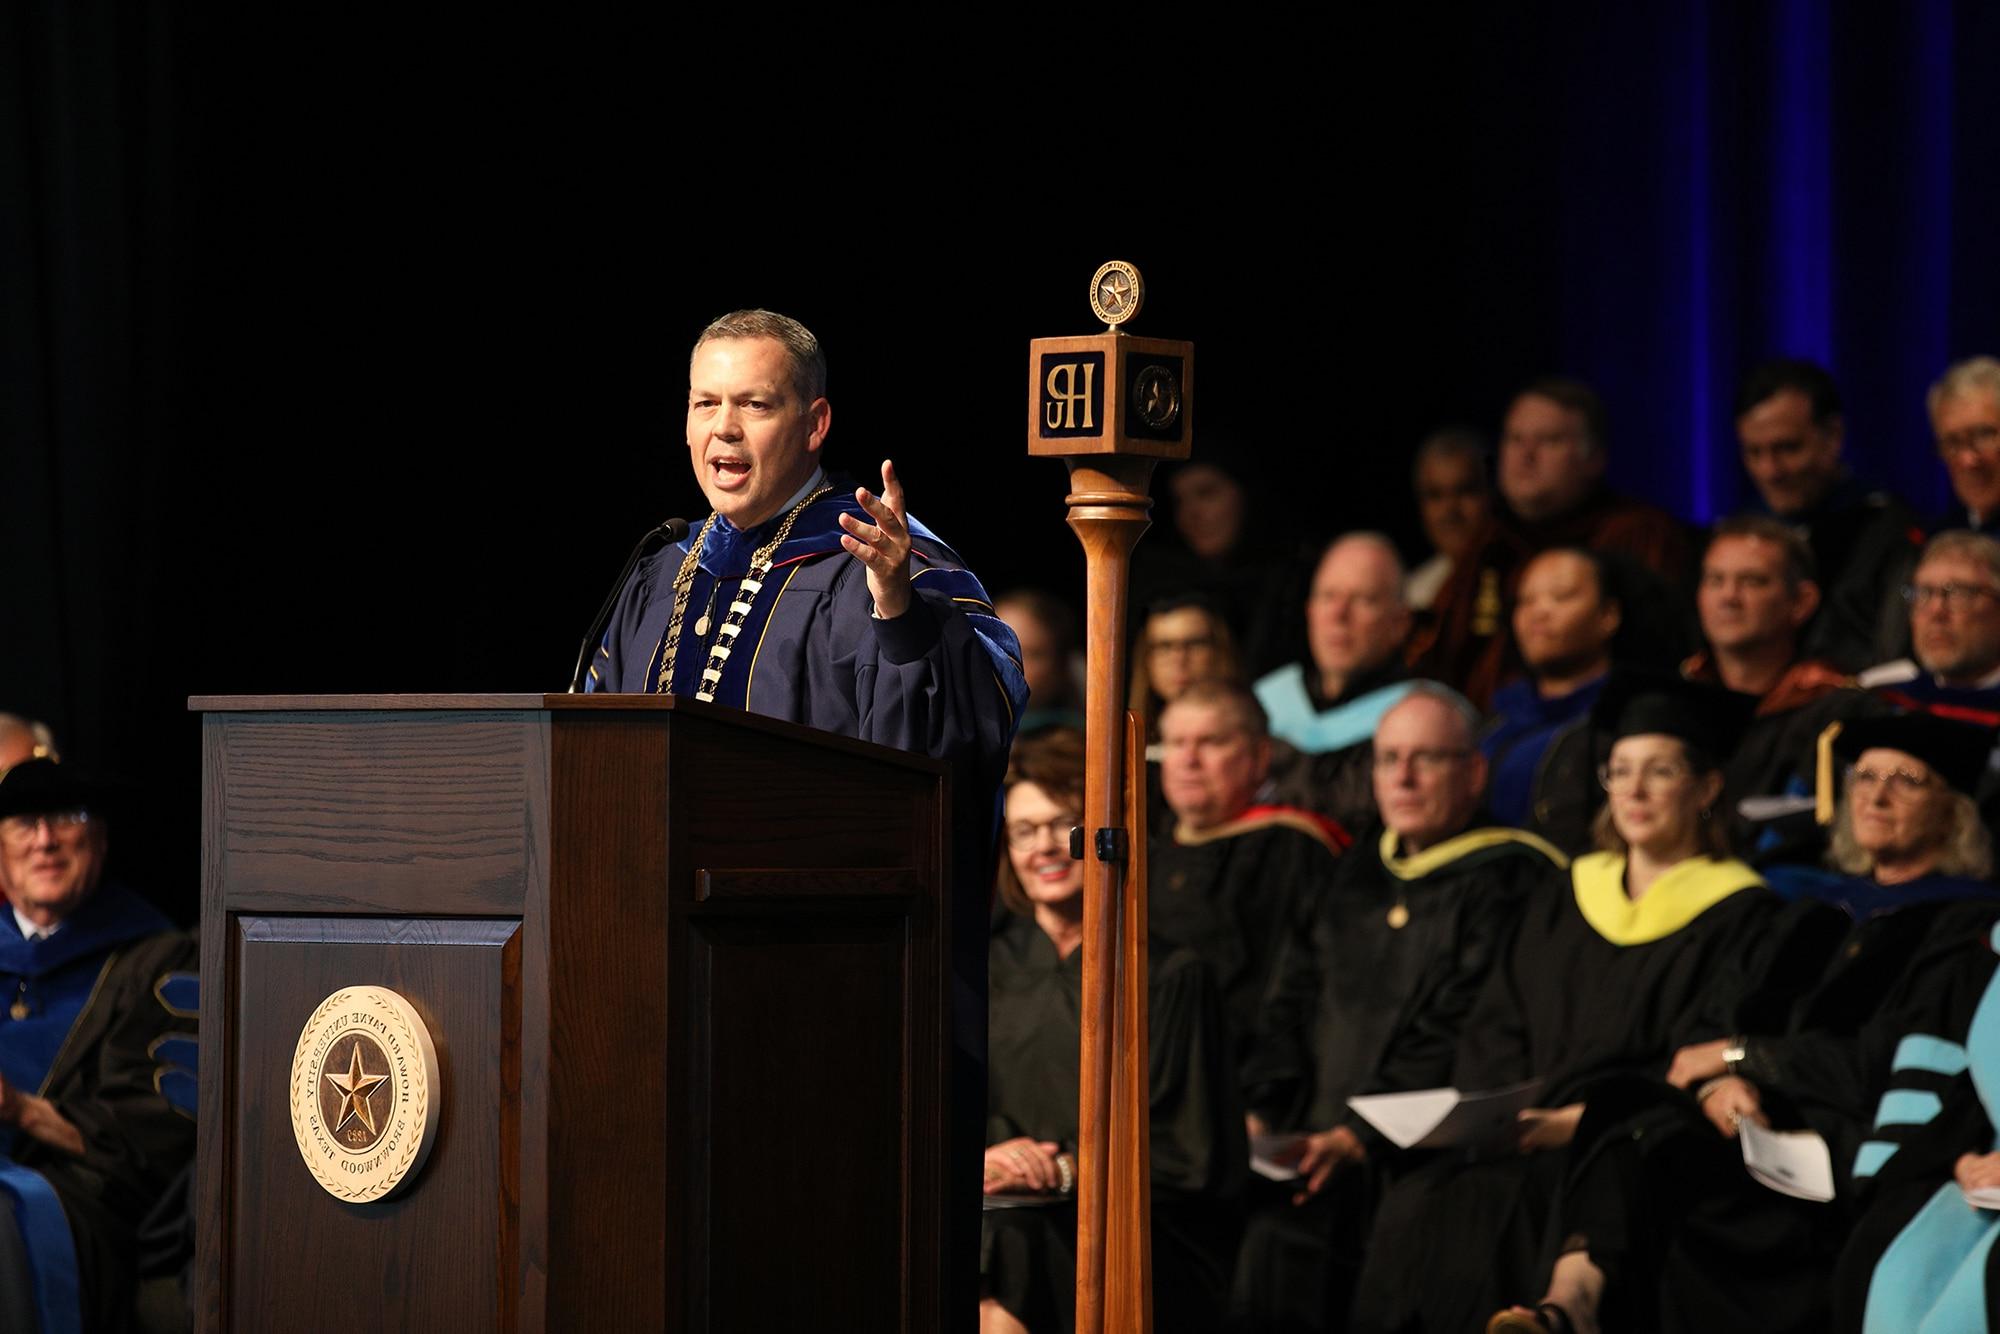 HPU celebrates the inauguration of Dr. Cory Hines '97, the institution's 20th president (2019)